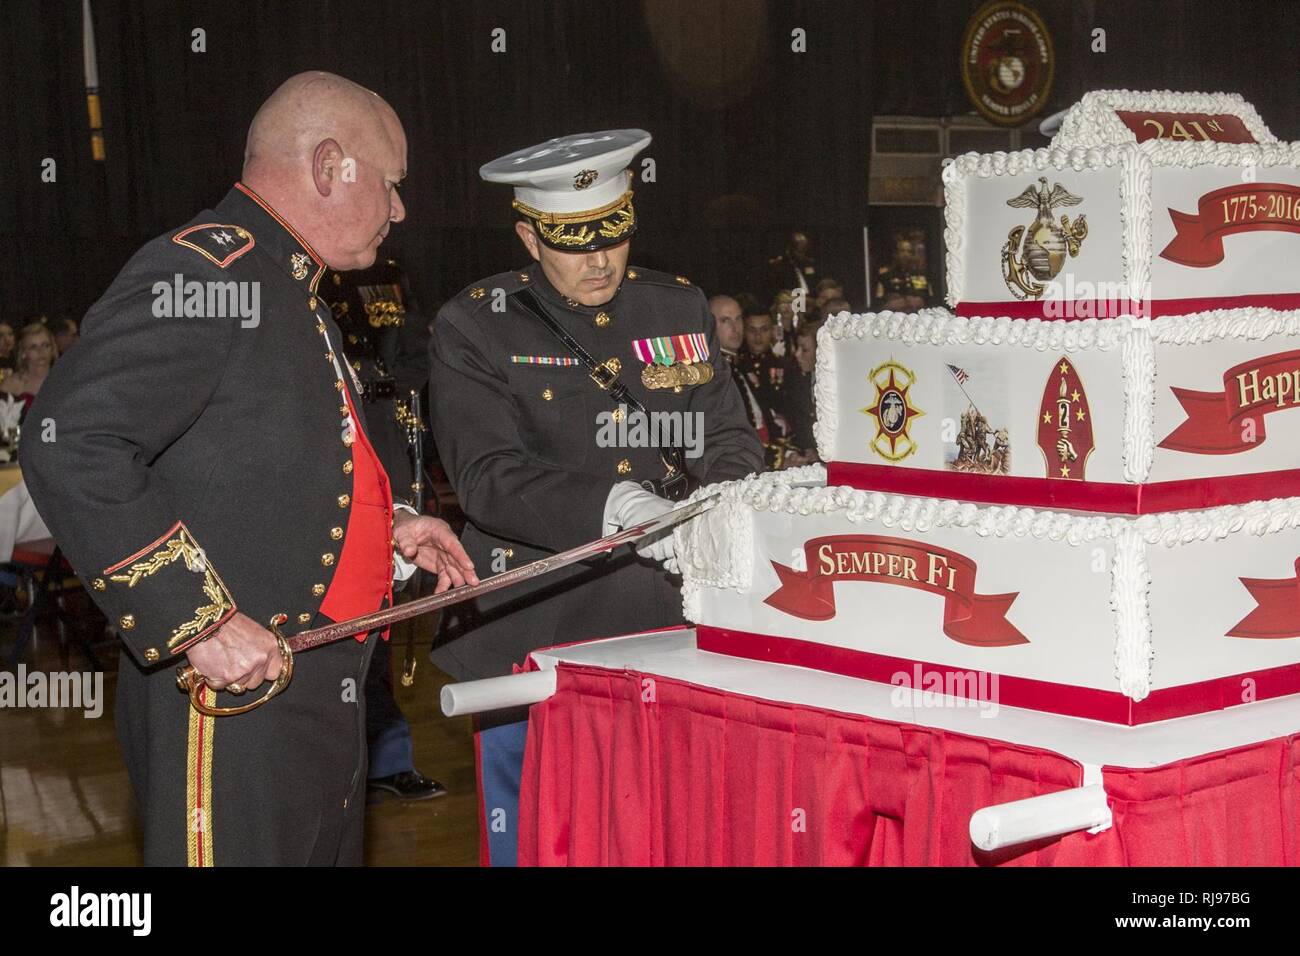 U.S. Marine Corps Maj. Gen. Walter L. Miller, Jr., commanding general of II Marine Expeditionary Force (II MEF), left, cuts a cake at the II MEF Marine Corps Birthday Ball at Marine Corps Base Camp Lejeune, N.C., Nov. 5, 2016. Commandant of the Marine Corps Gen. Robert B. Neller attended the birthday ball as the guest of honor. Stock Photo